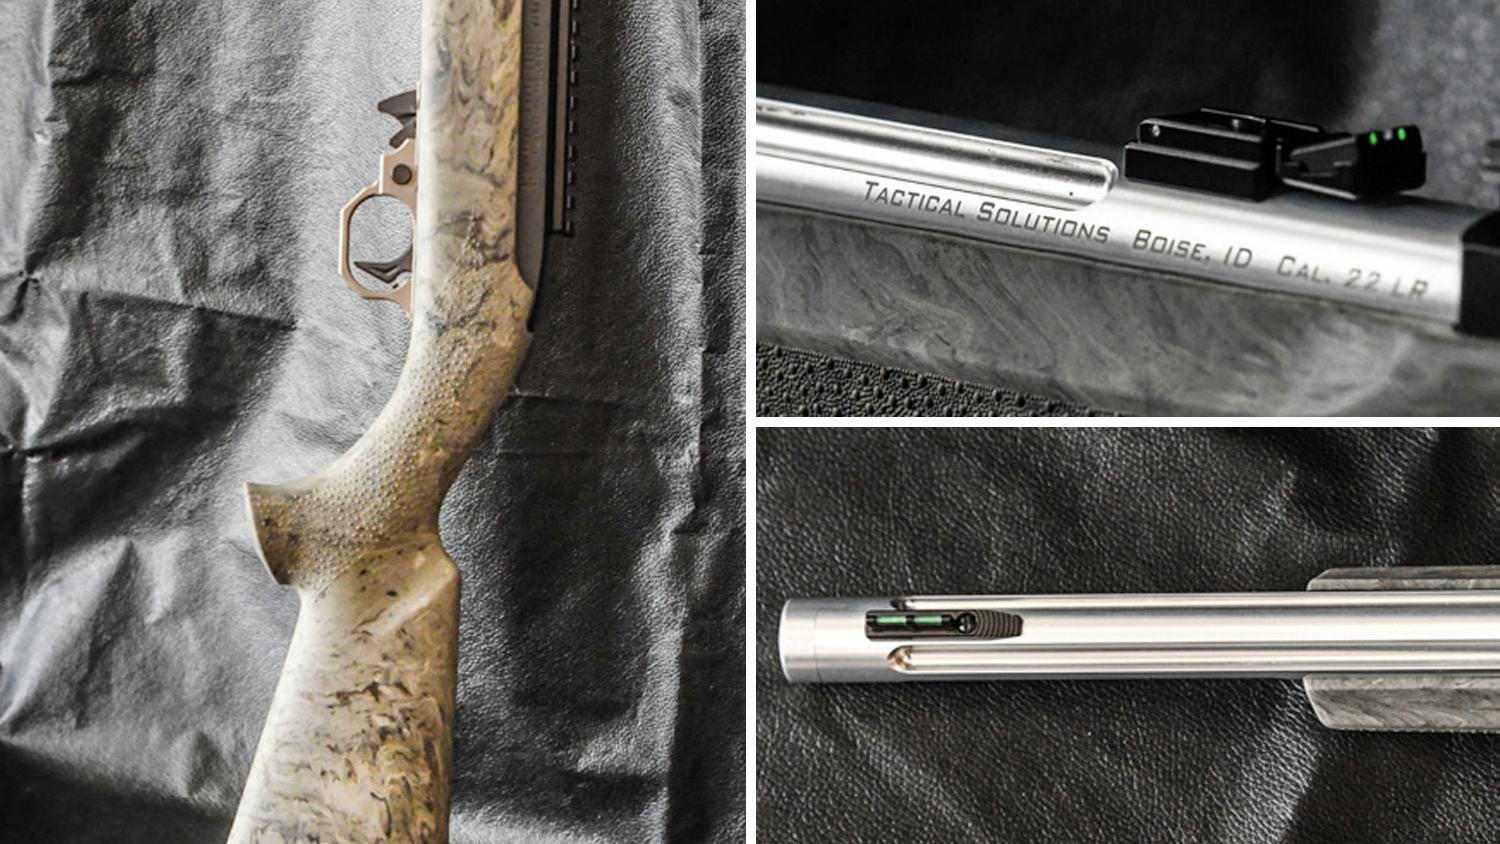 Ruger 10/22 with TacSol aftermarket upgrades